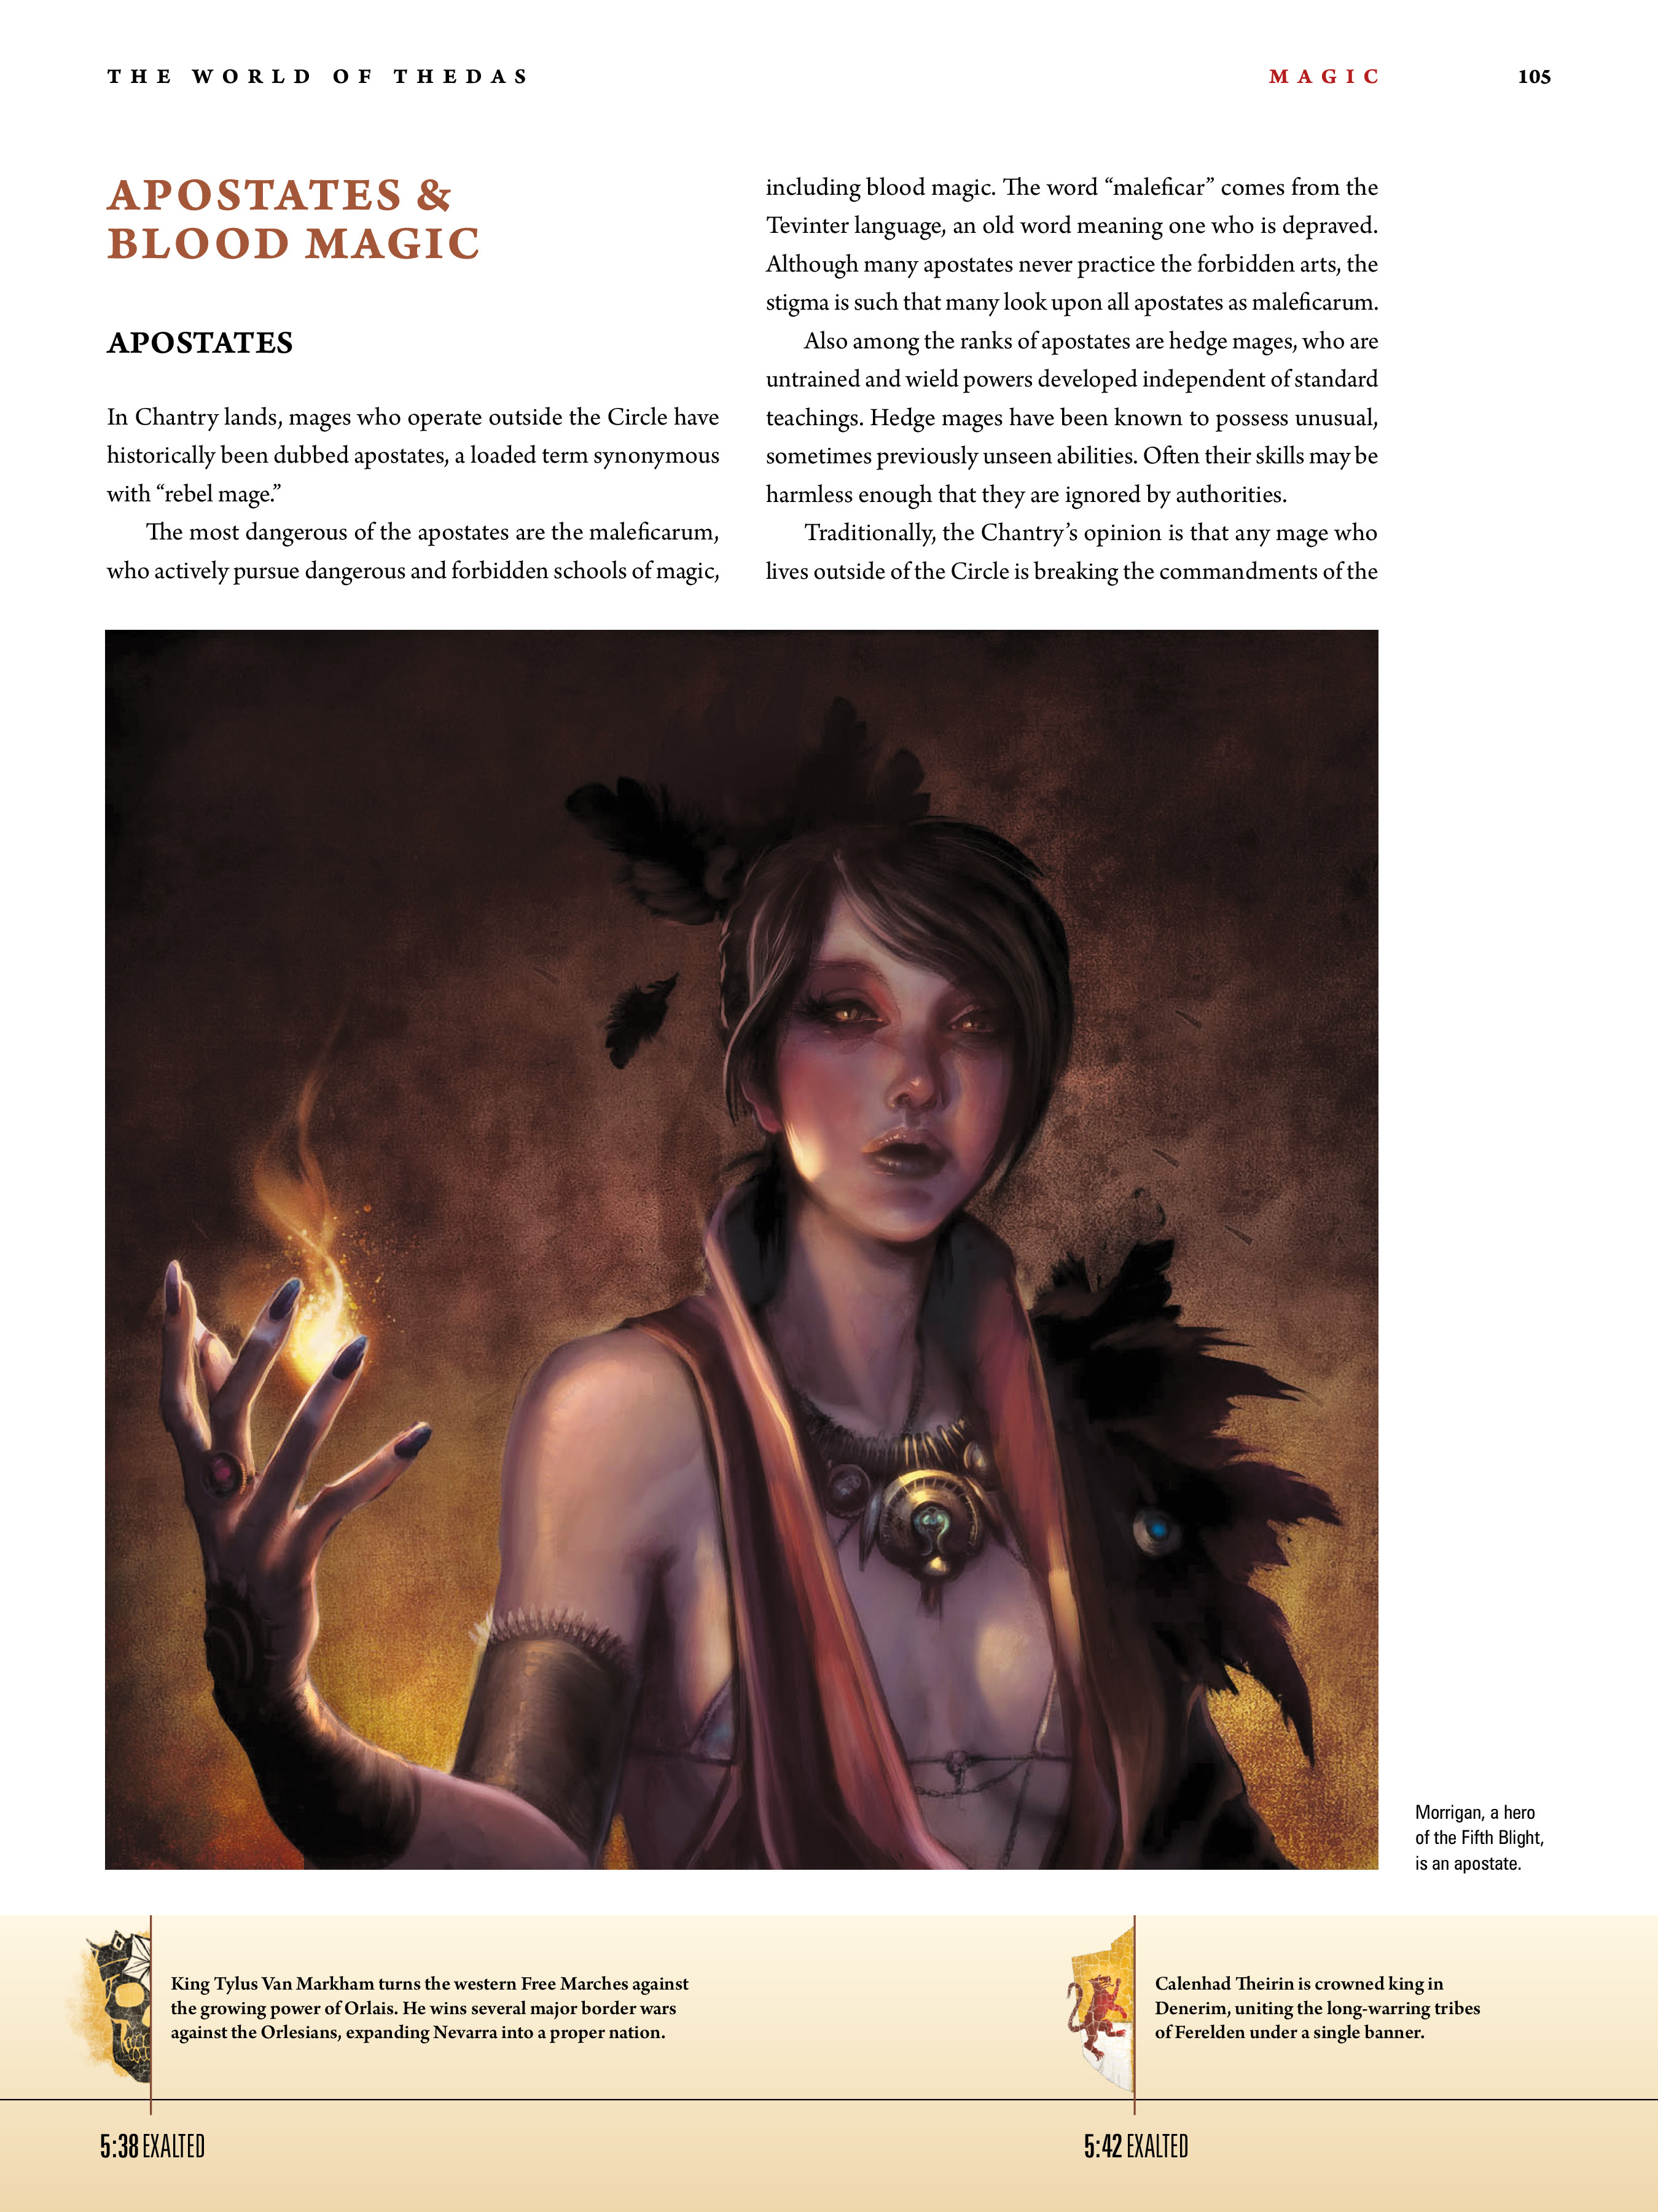 Read online Dragon Age: The World of Thedas comic -  Issue # TPB 1 - 85